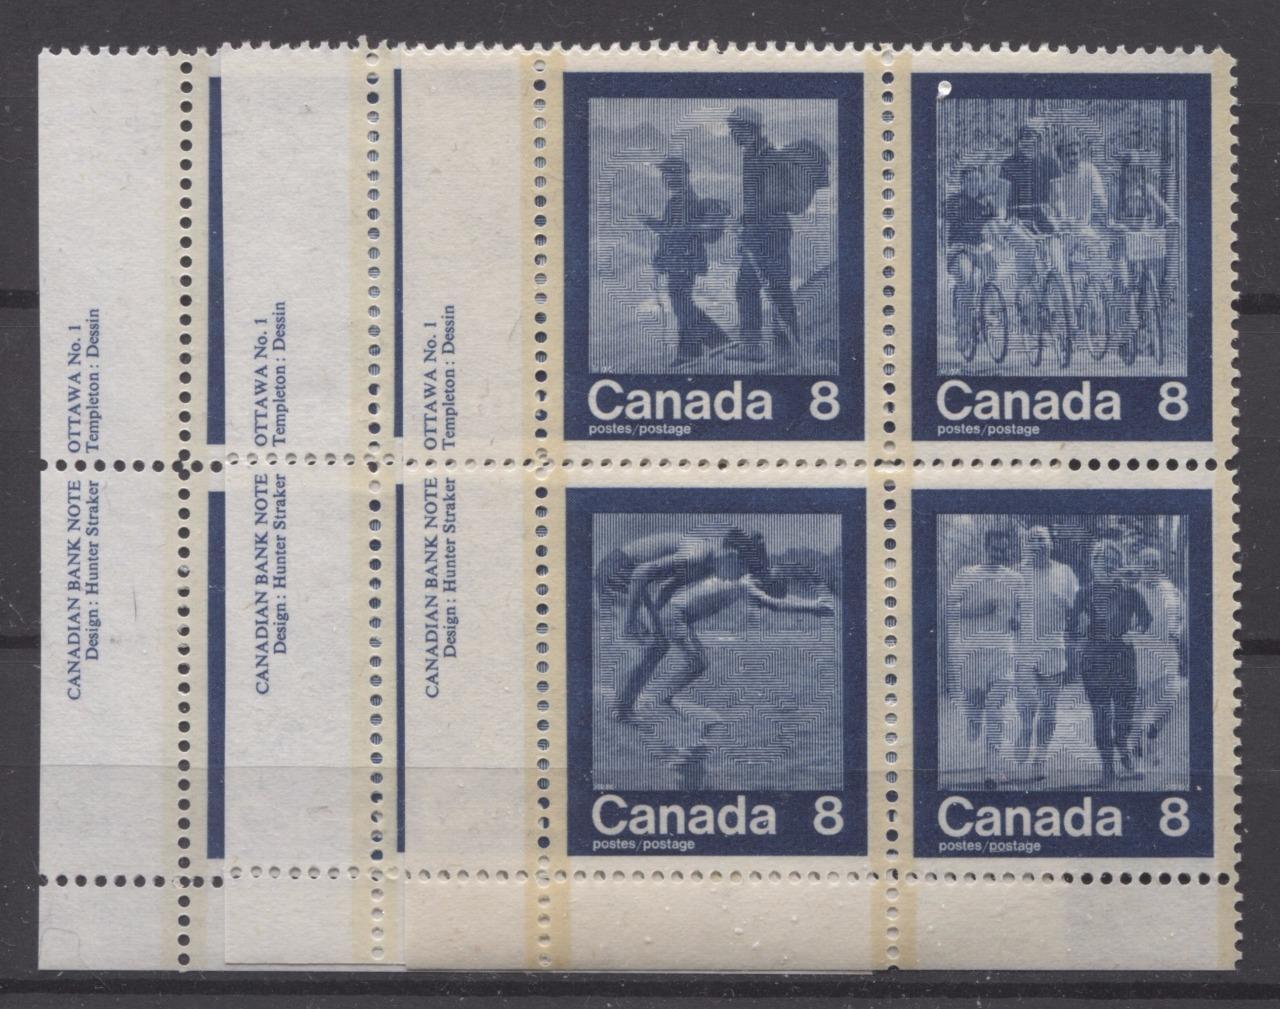 Canada #632a (SG#768a) 1974 Summer Sports Issue Block of 4 Paper/Tag Type 1 Plate 1 LR VF-80 NH Brixton Chrome 